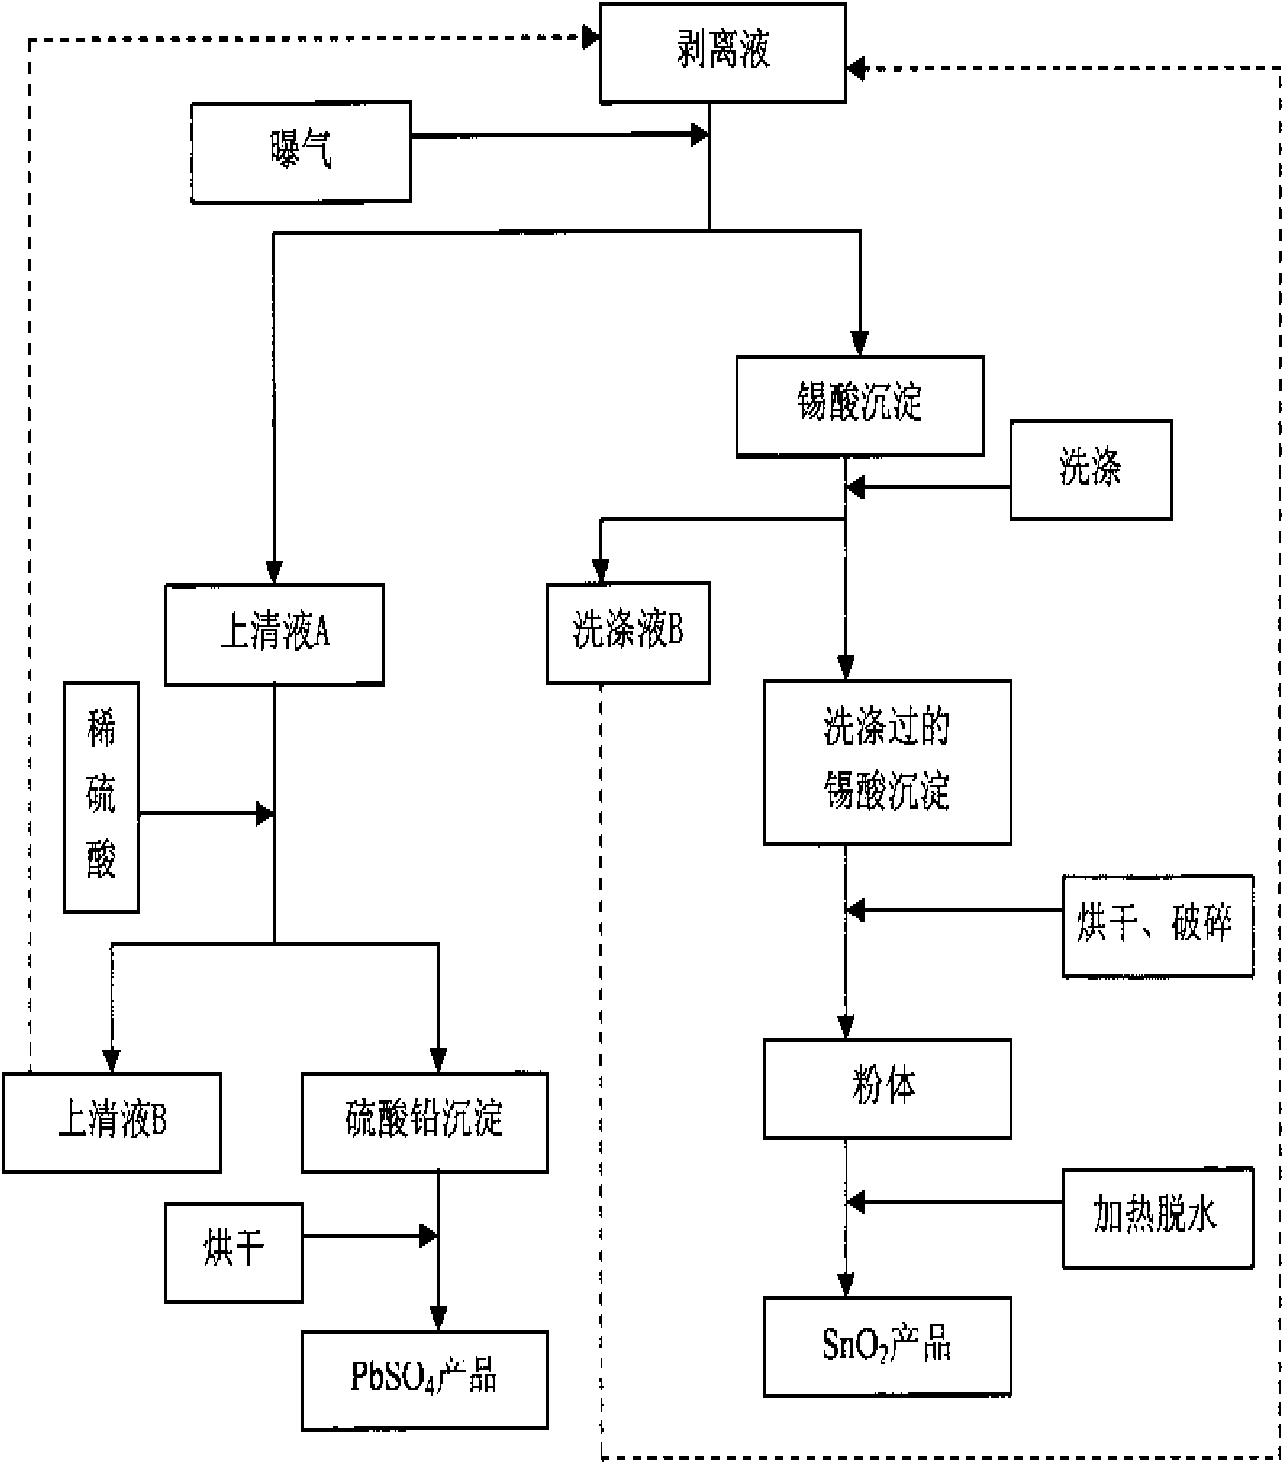 Tin-lead recovery method in waste circuit board